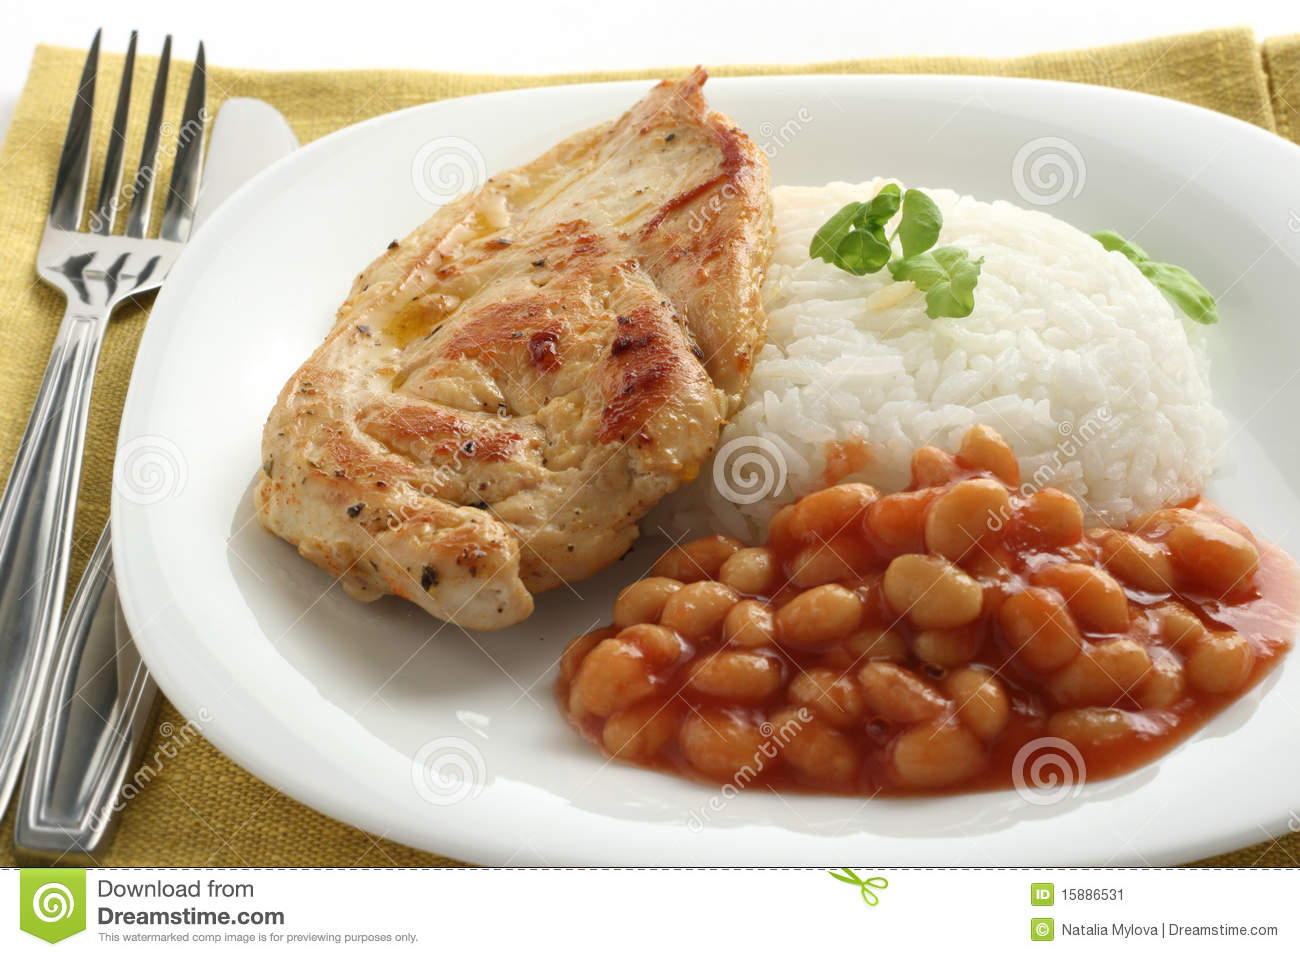 Fried Chicken With Rice And Beans Stock Image   Image  15886531